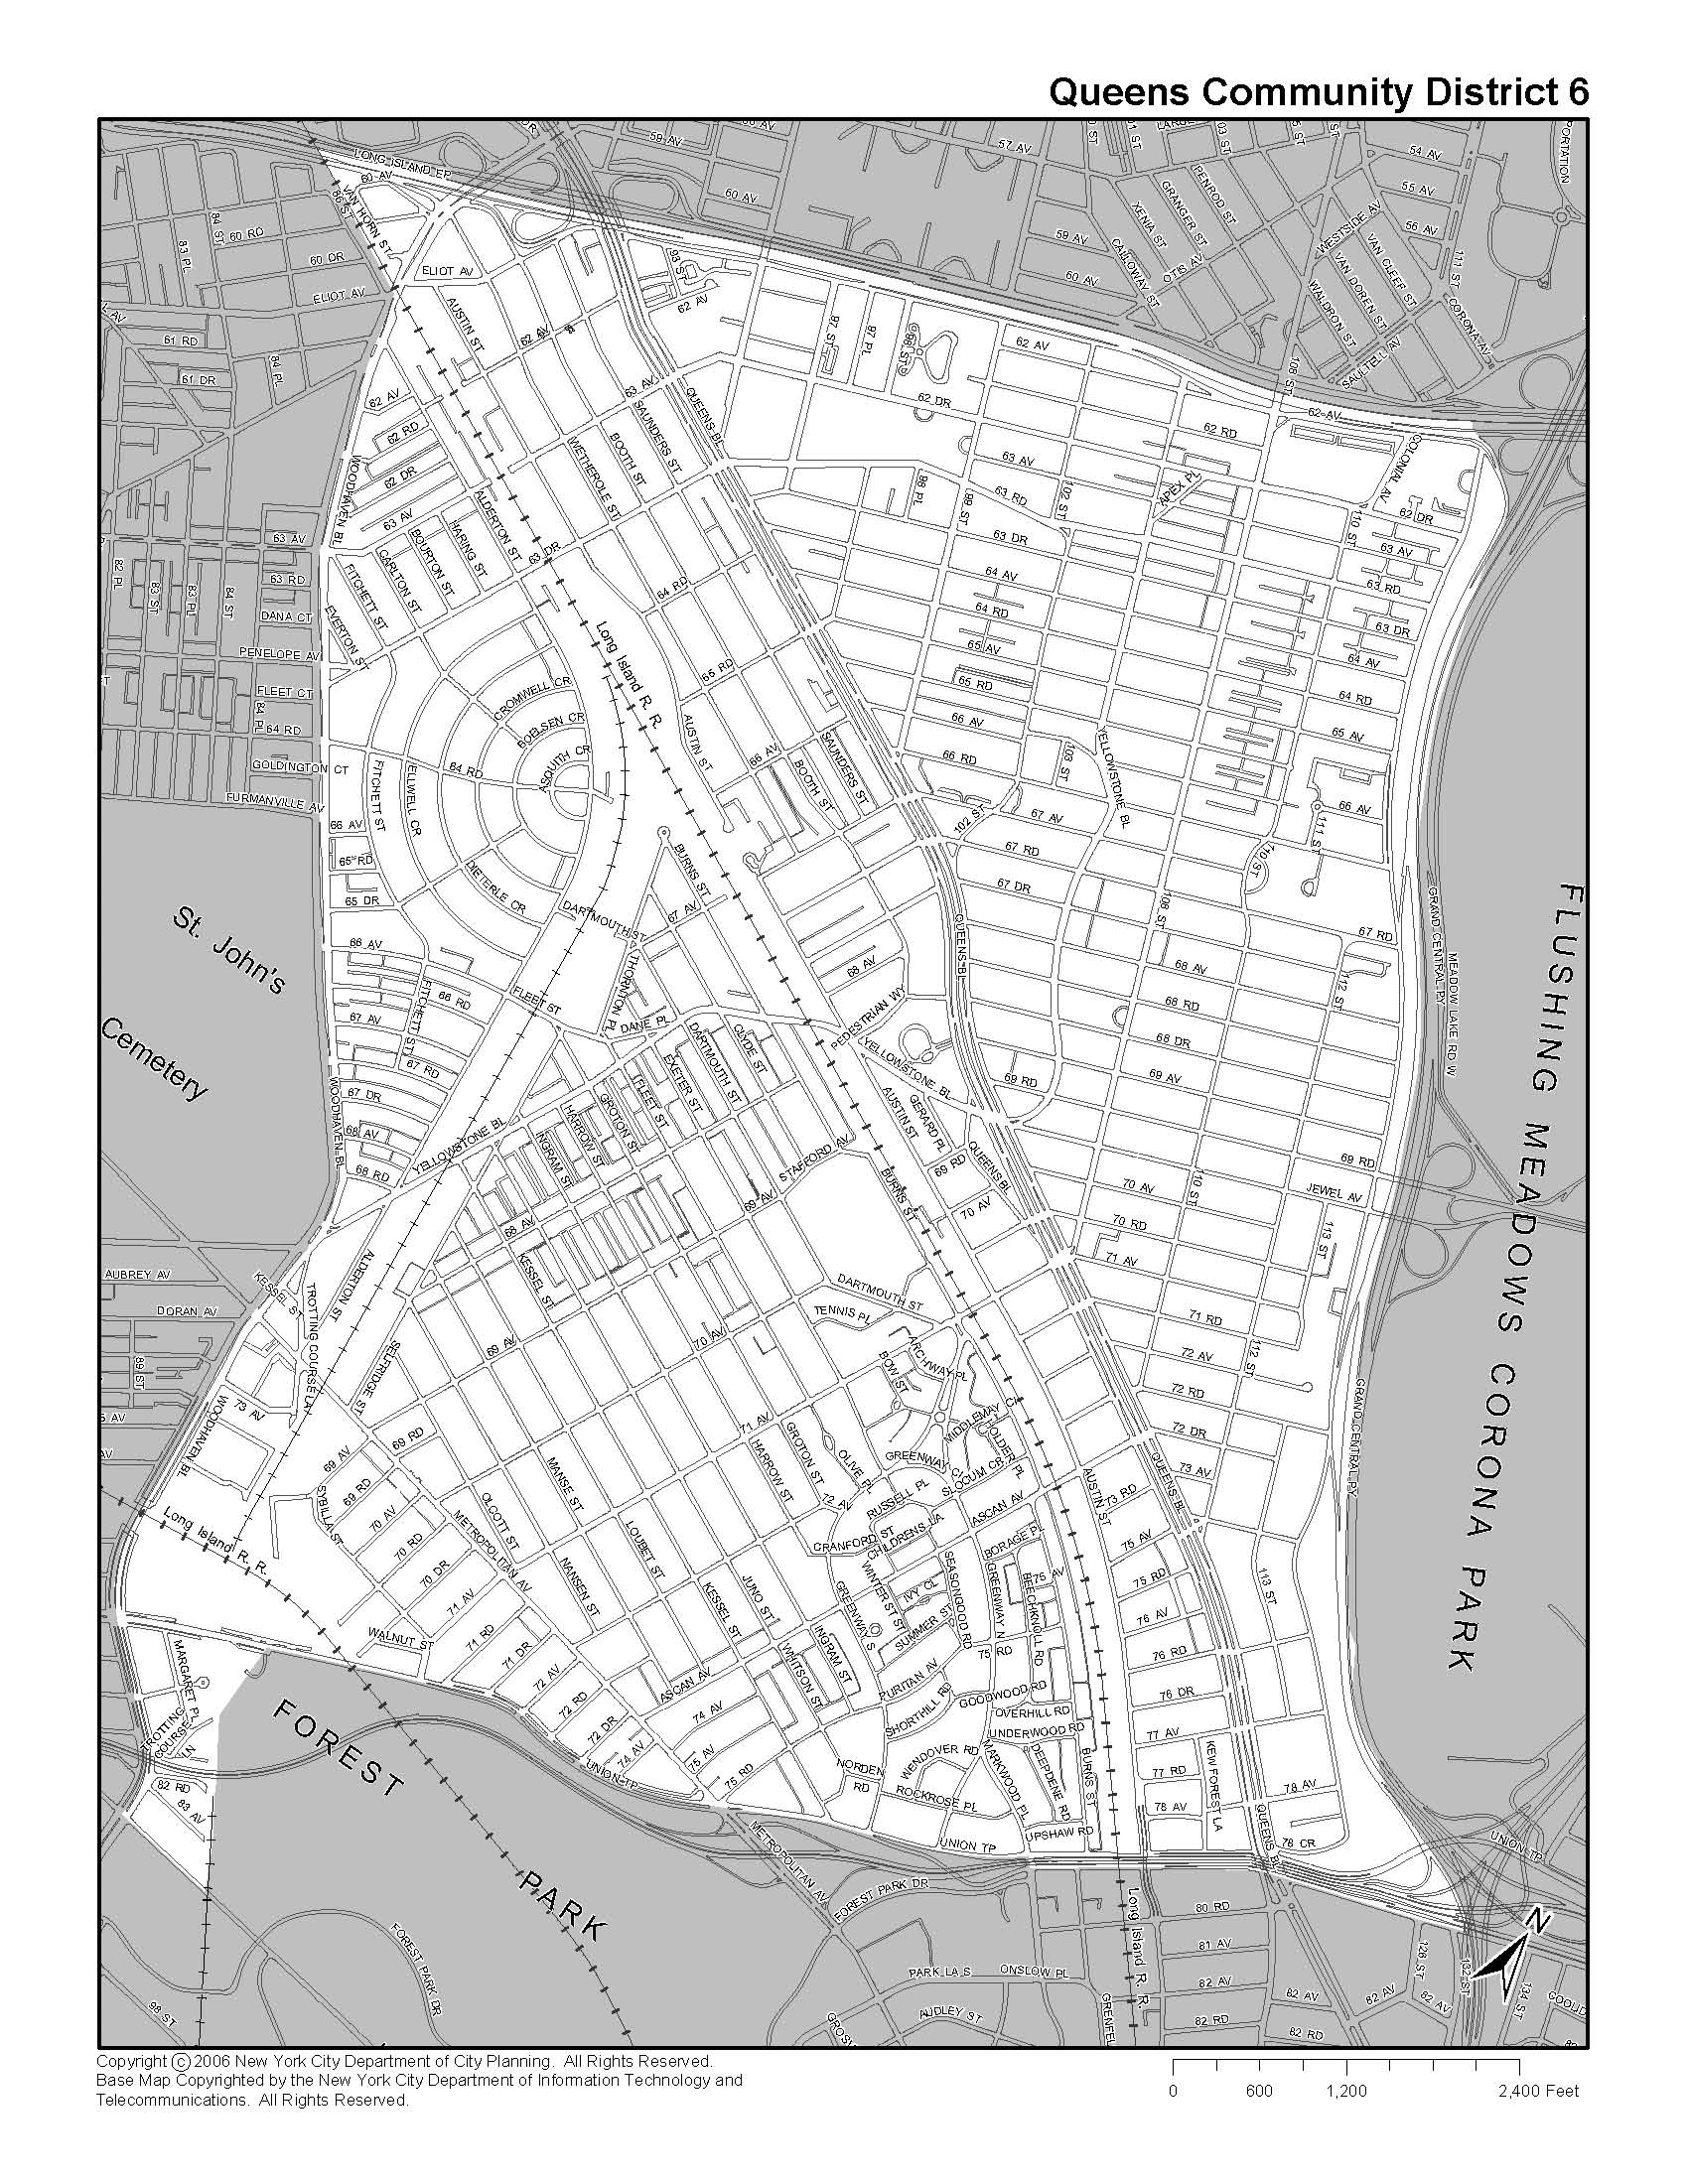 Queens Community District Base Map detailing the boundaries of CB 6